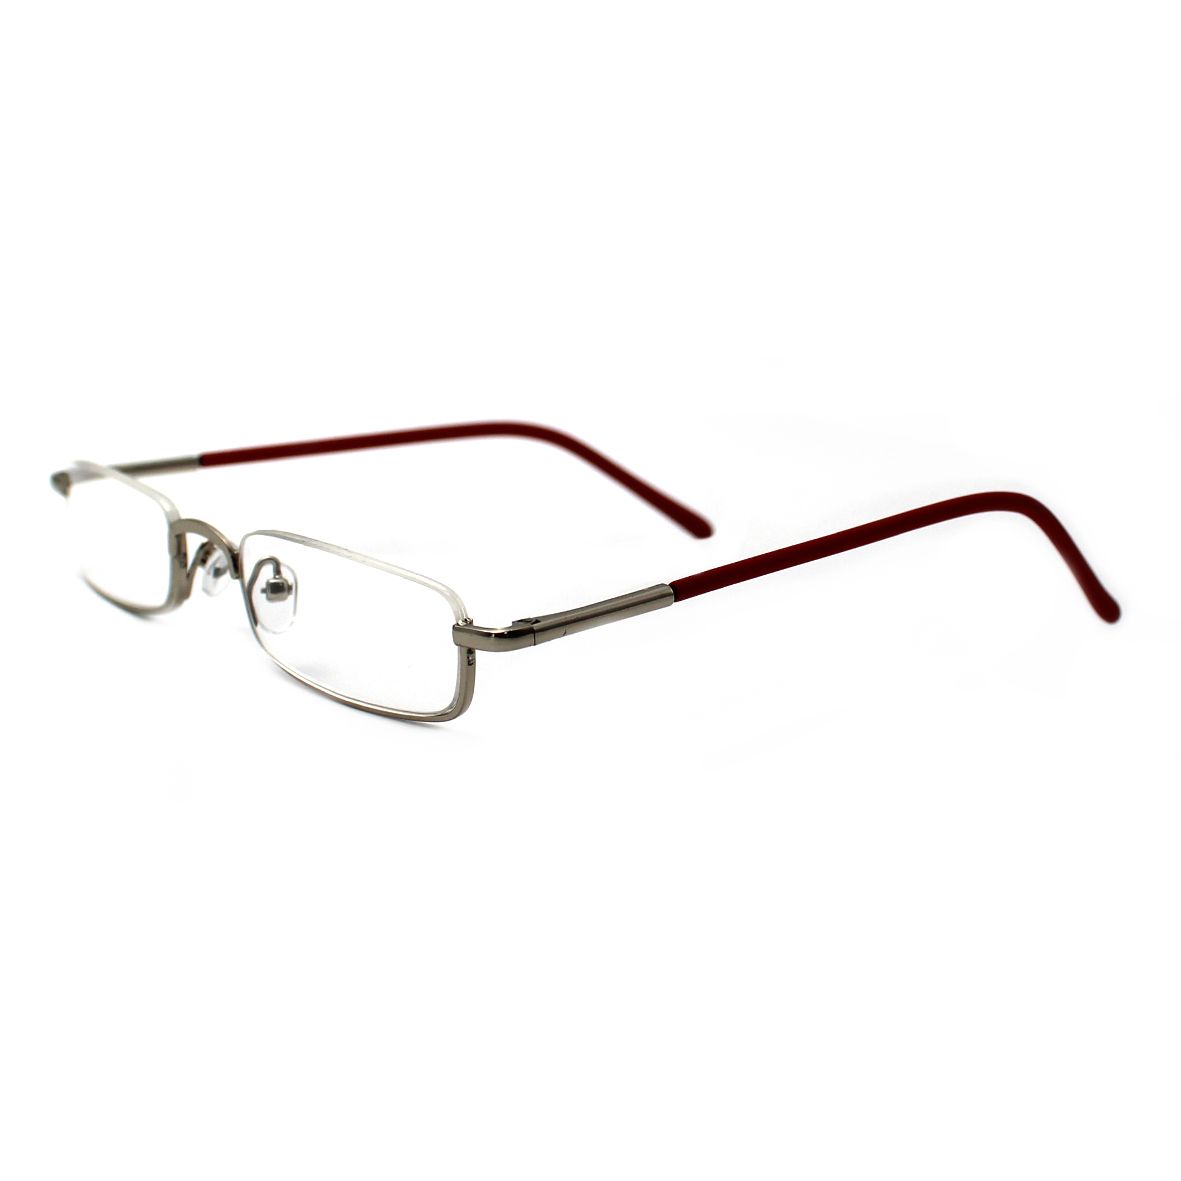 X-tra Vision Top Rimless Reading Glasses - Frans | Buy Online in South ...